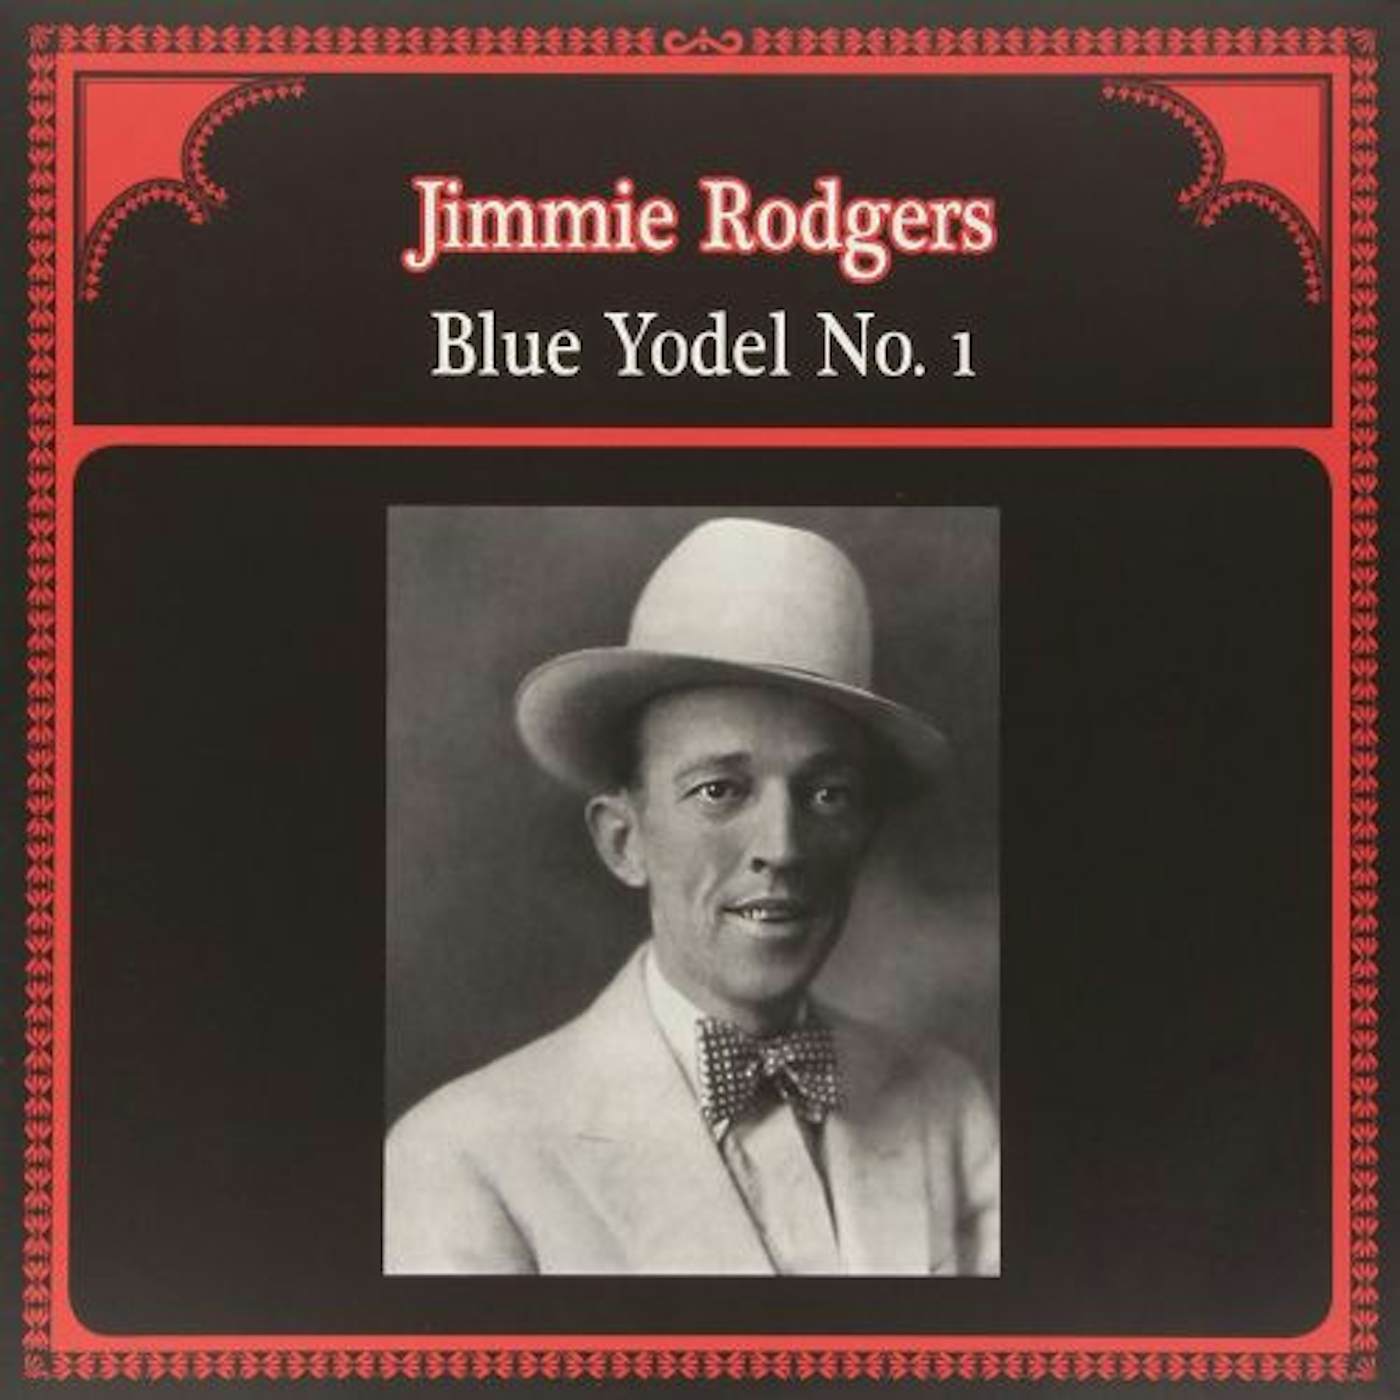 Jimmie Rodgers BLUE YODEL NO. 1 Vinyl Record